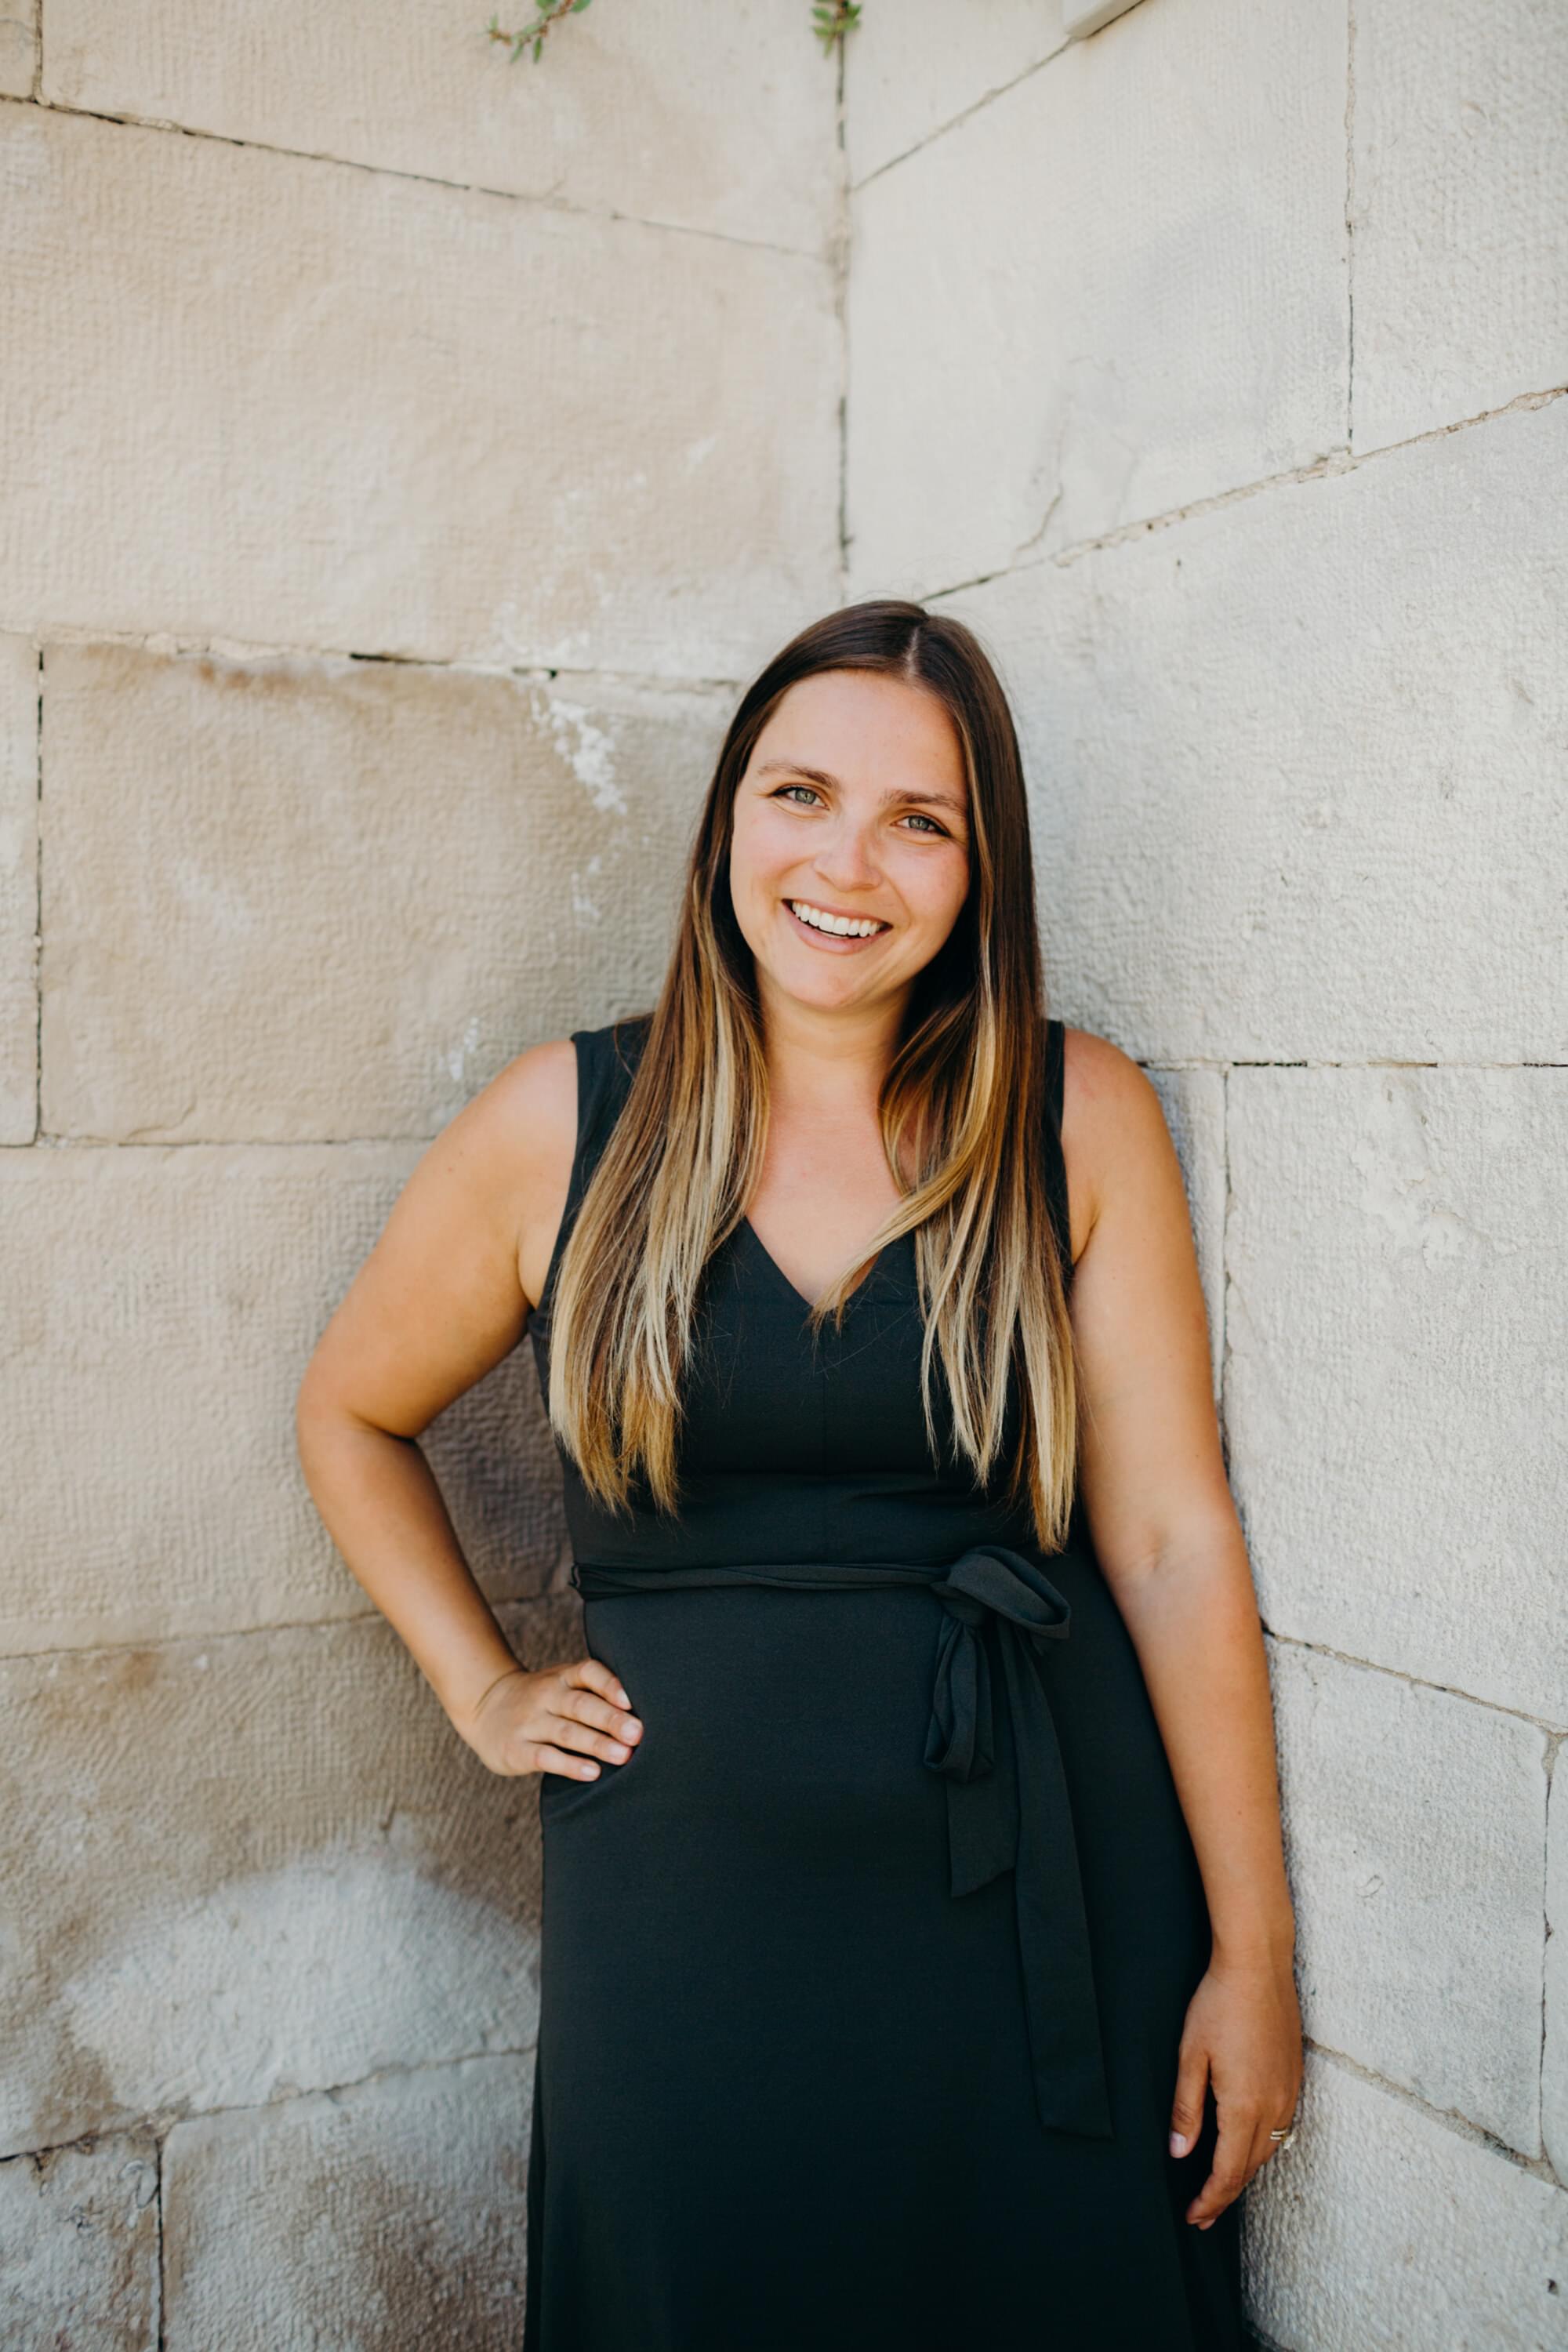 Kalyna Miletic is an online entrepreneur who has dedicated her career to supporting professional development one conversation at a time through founding Kickstart Your Work which provides one on one coaching to professionals. She's an author of, The Success Trifecta.